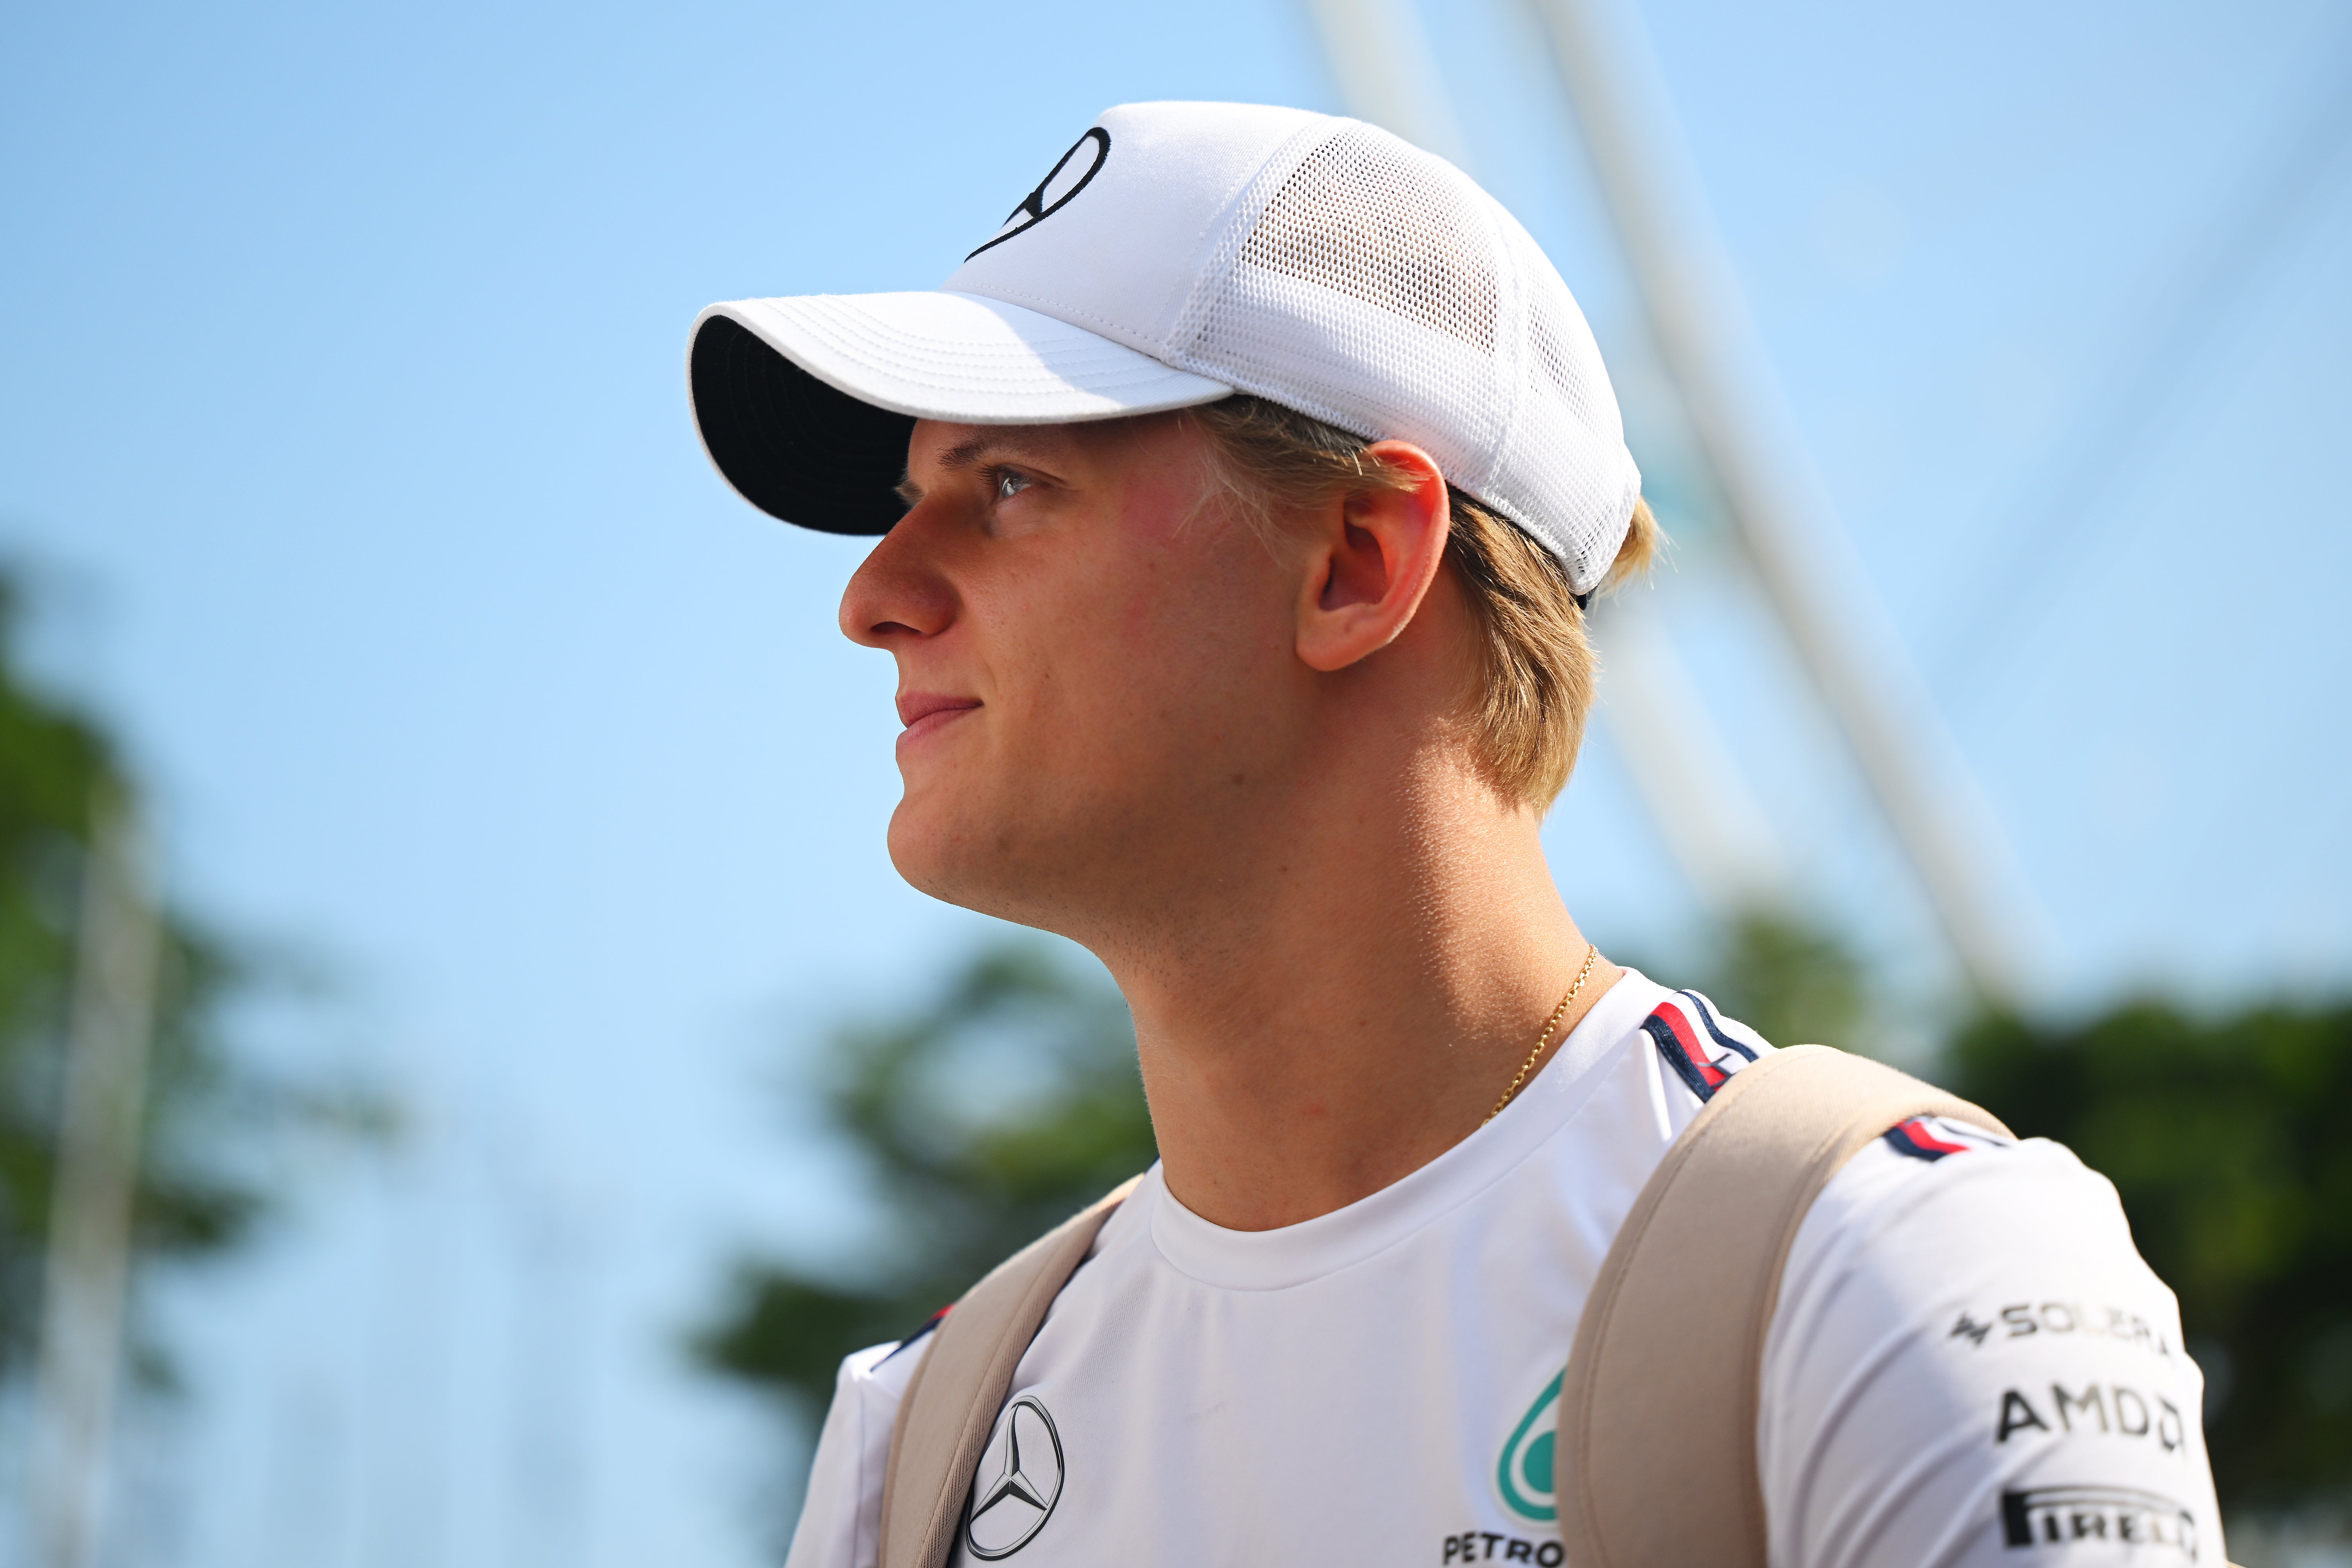 Mick Schumacher will make a return to racing for Alpine in 2024